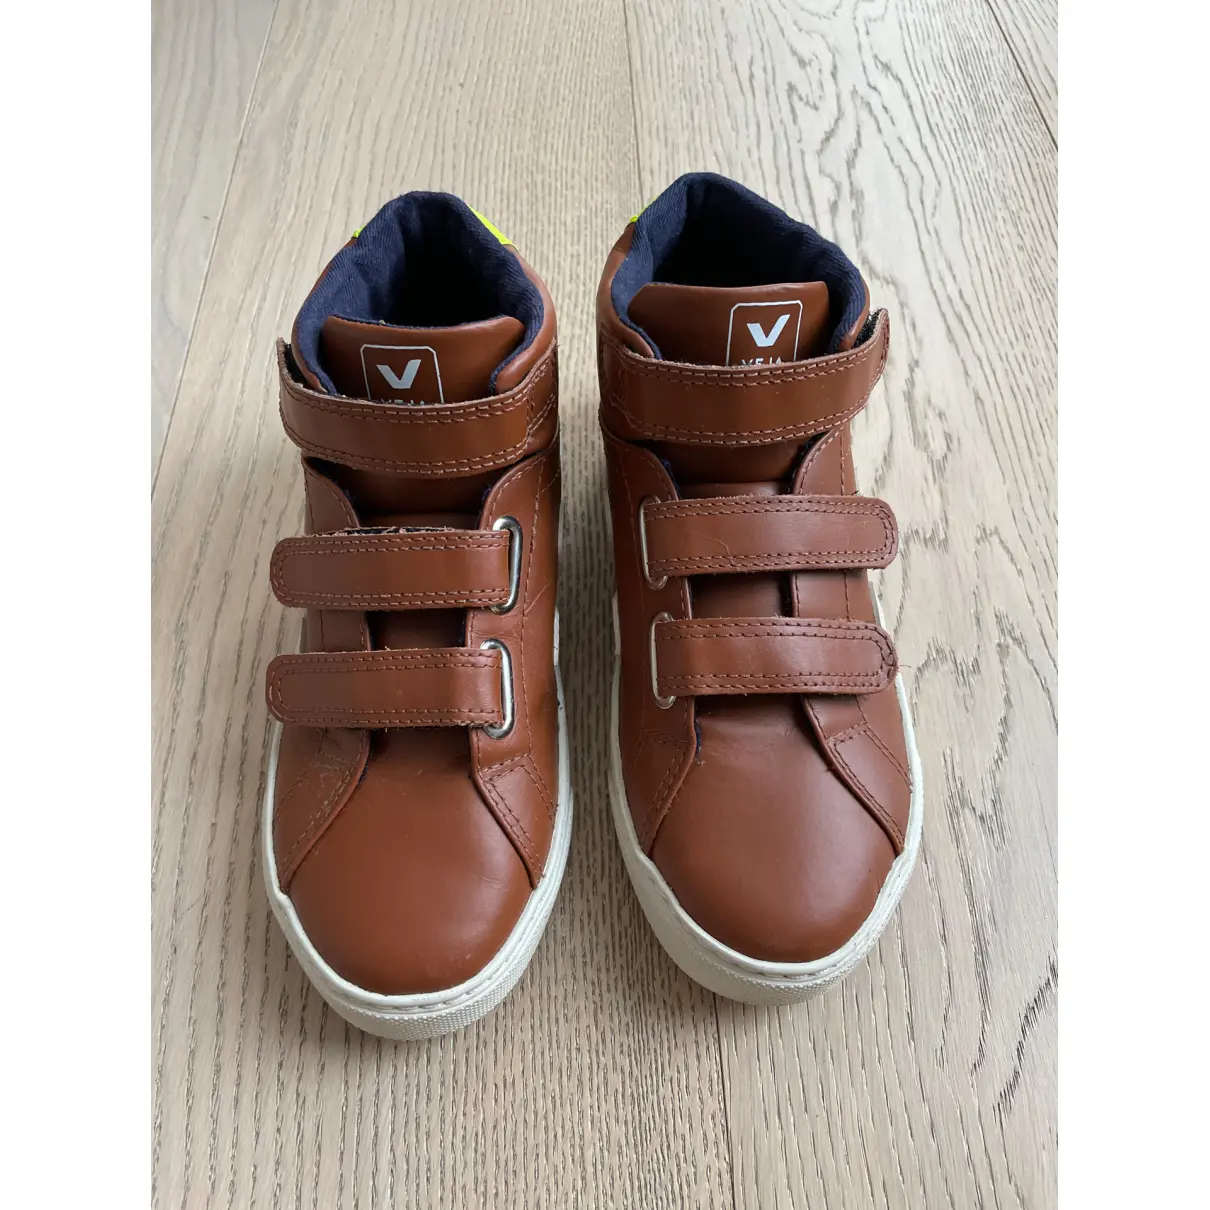 Buy Veja Leather trainers online